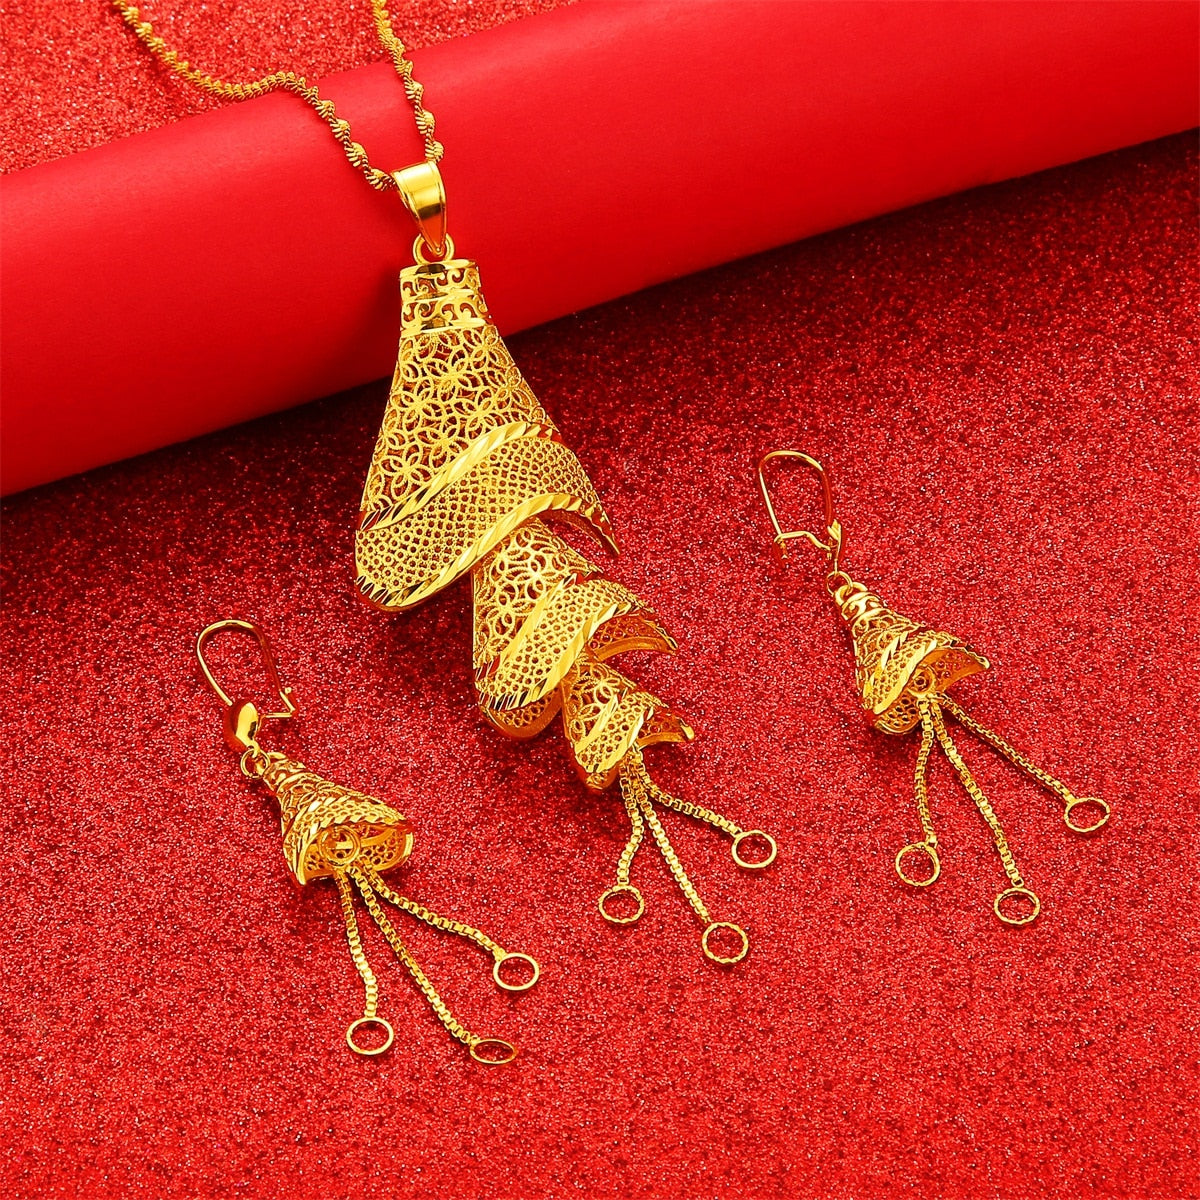 African Gold Color Pendant Necklaces Earrings Jewelry Set